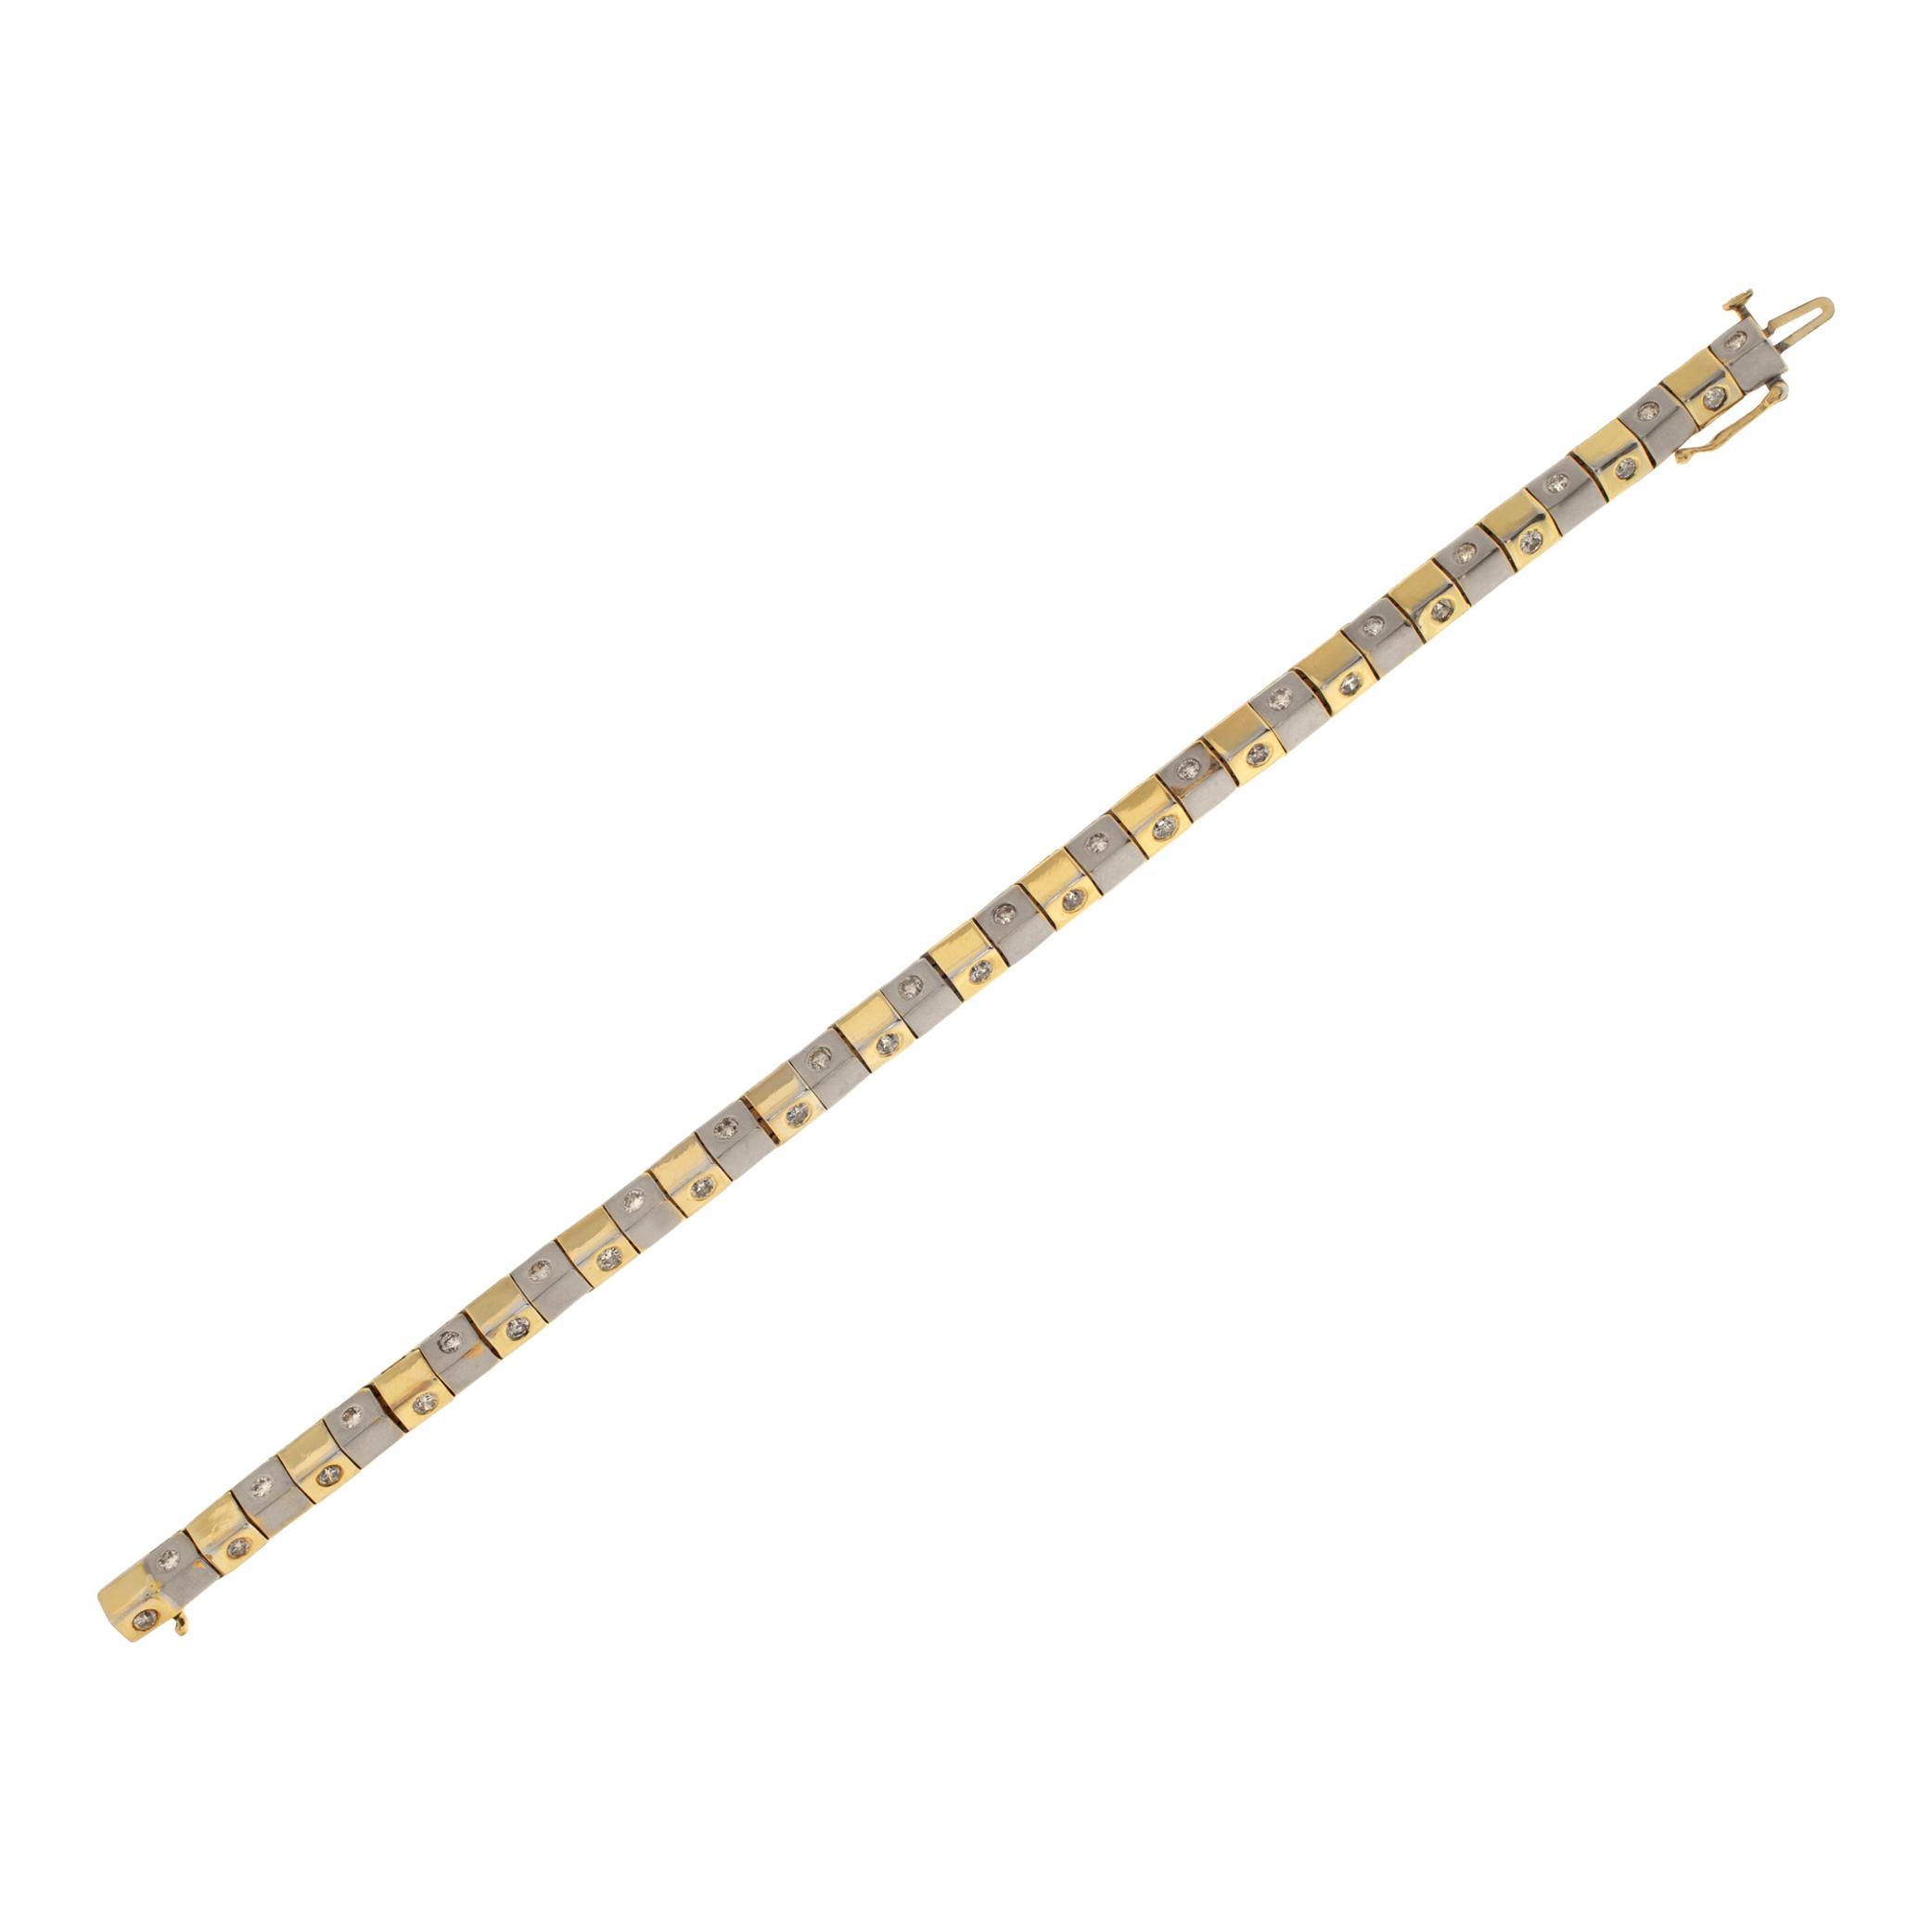 Box link bracelet in 18k white & yellow gold with approximately 1 carat in round diamonds. 7.25in in length.